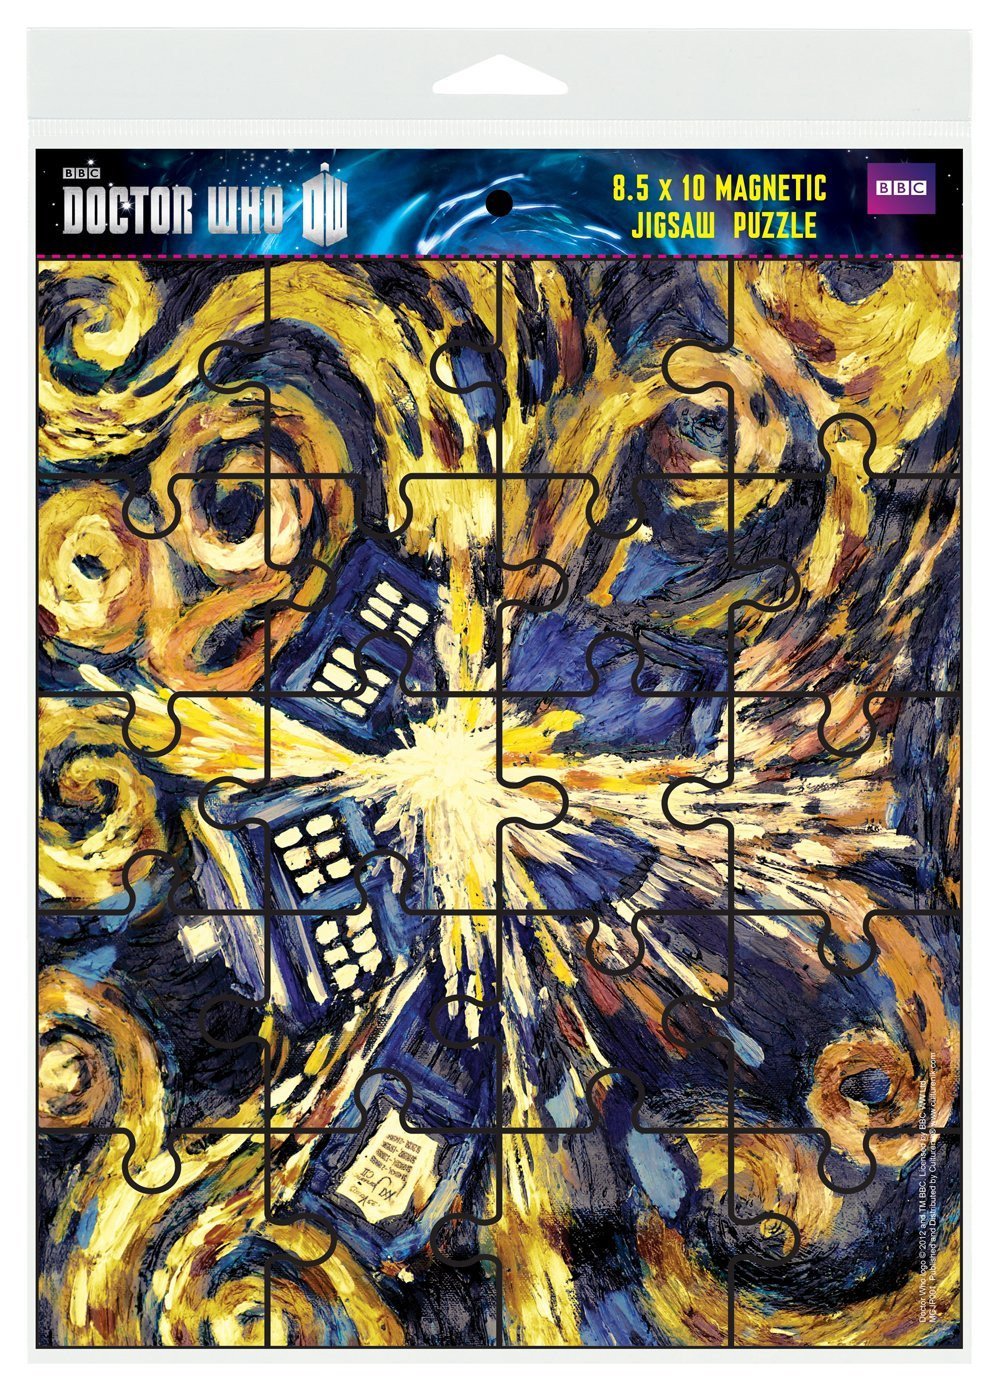 Doctor Who The Exploding Tardis (Van Gogh Exploding TARDIS) Sci Fi British TV Television Show (8.5x10 Inch) Magnetic 20-Piece Jigsaw Puzzle Magnet by Culturenik